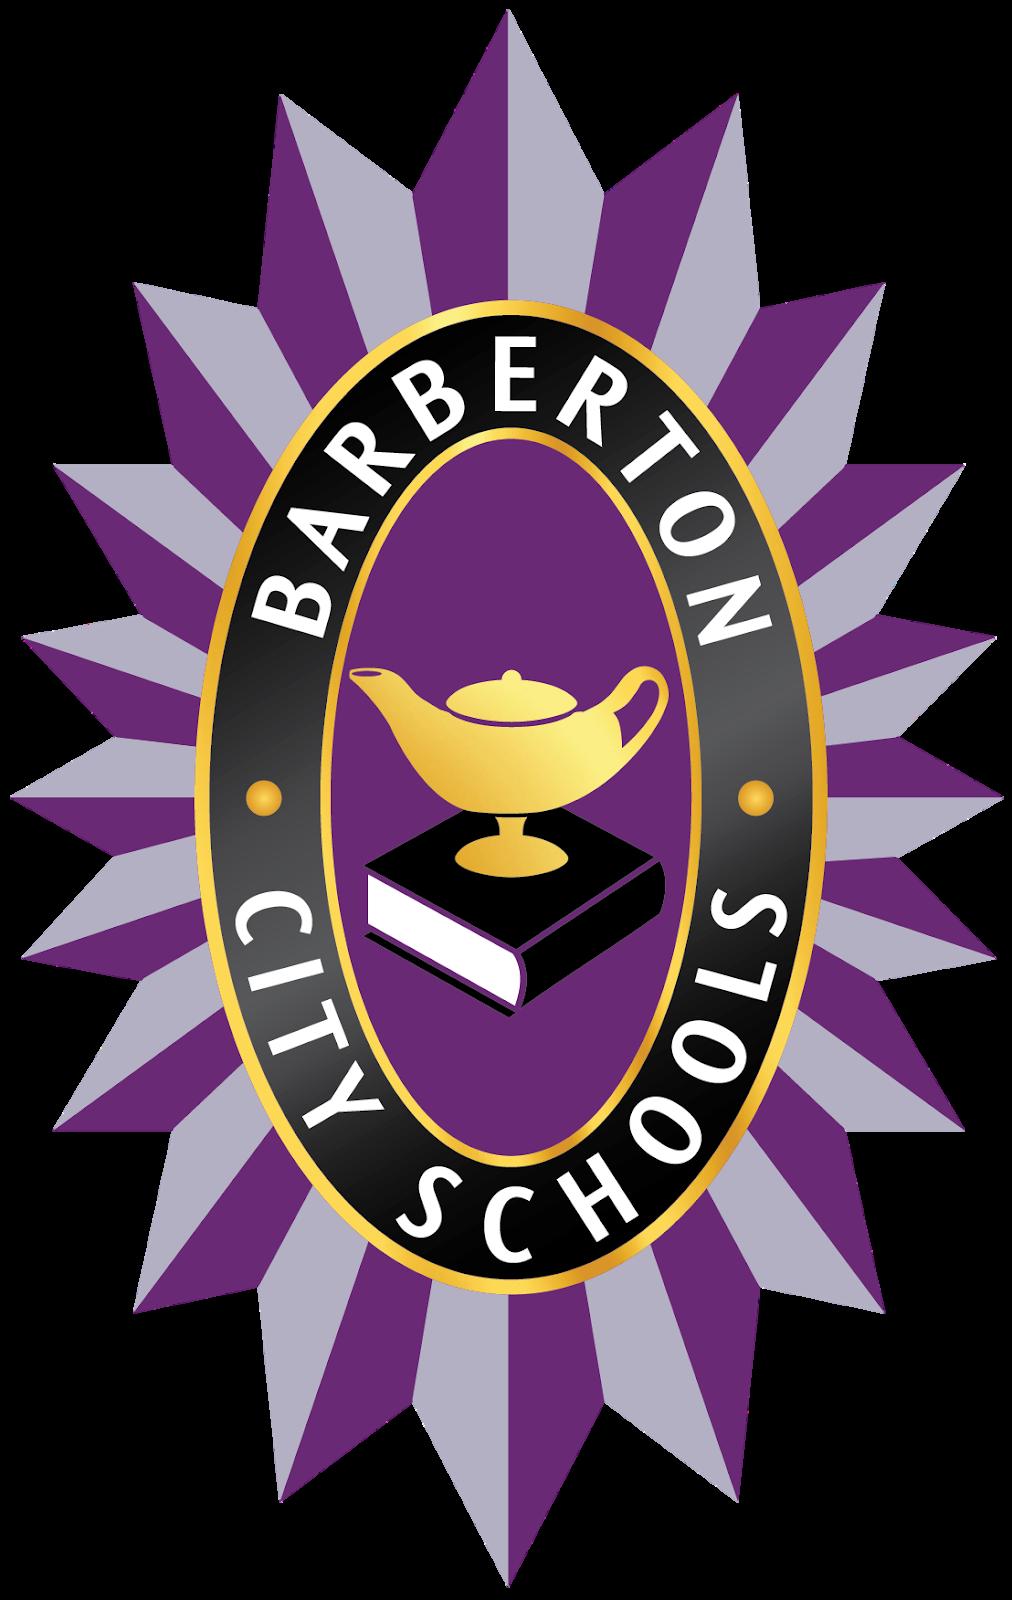 The mission of the Barberton City School District is meeting each child where they are at and growing them year to year until they are on one of three pathways - Enrolled, Enlisted, Employed.